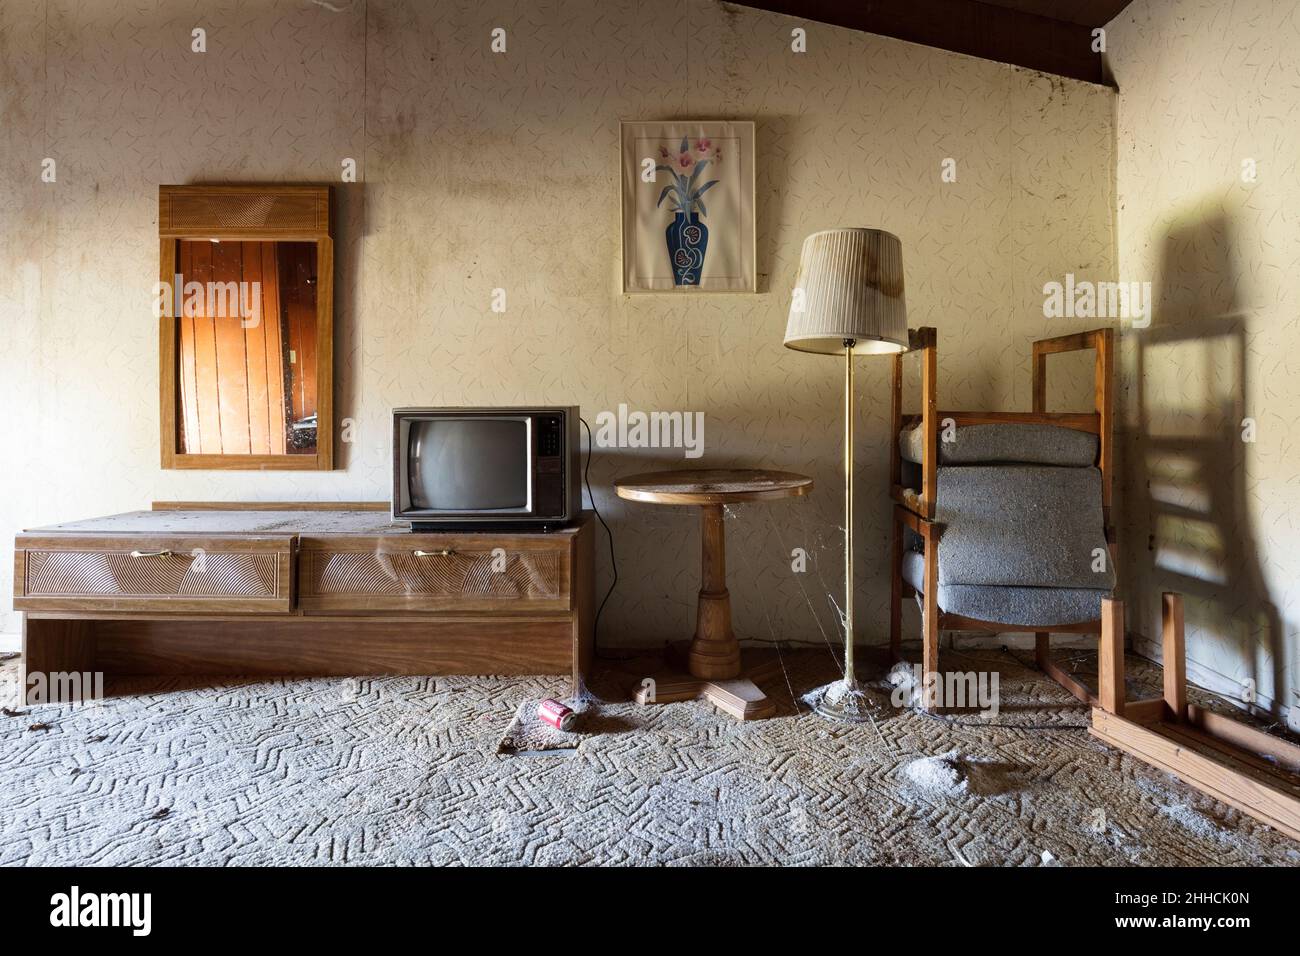 An abandoned motel room with decay starting to take hold Stock Photo